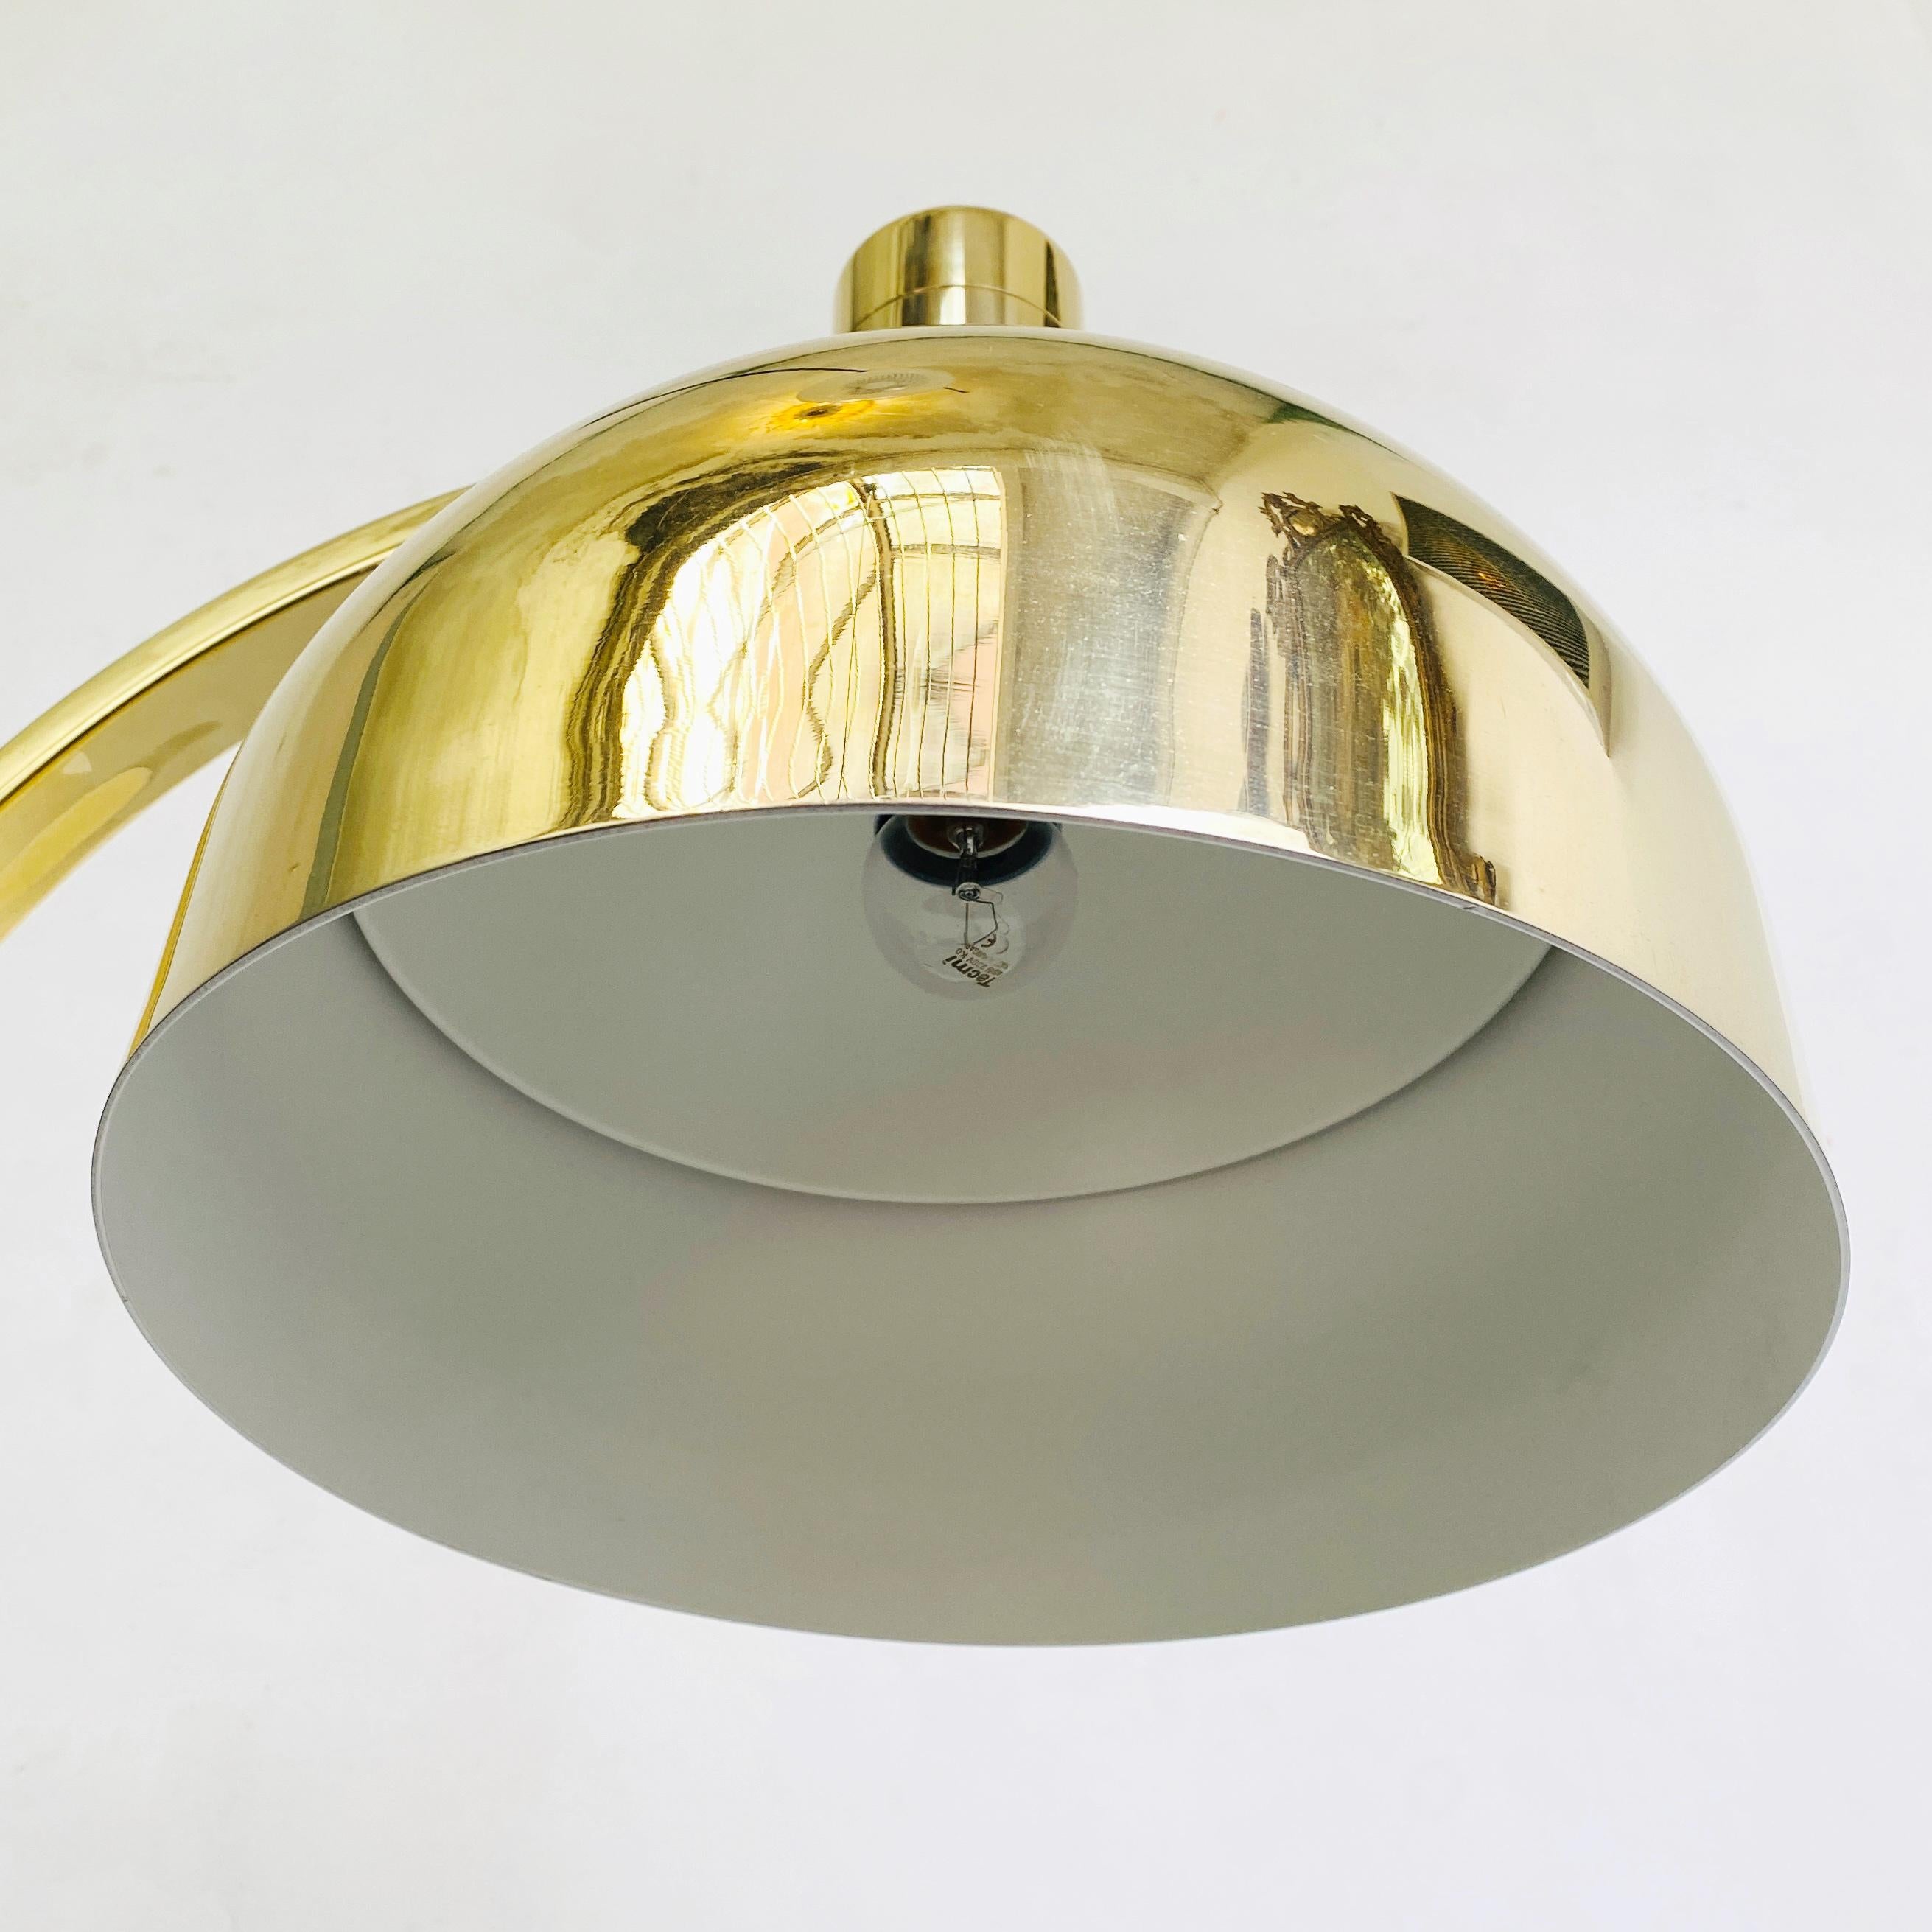 AM \ AS Gold Chrome Table Lamp by Franco Albini and Franca Helg for Sirrah, 1969 For Sale 6